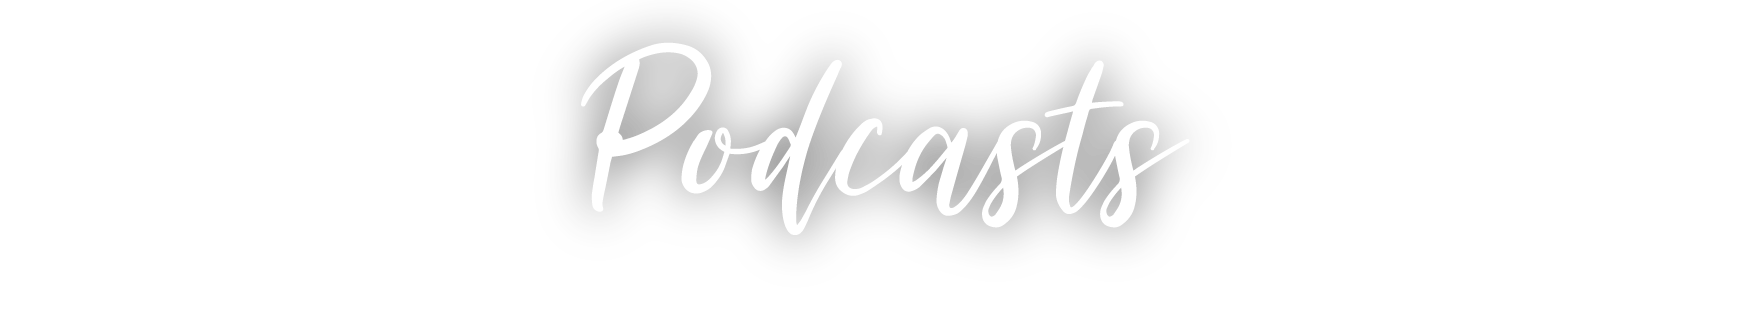 White cursive text that reads: podcasts